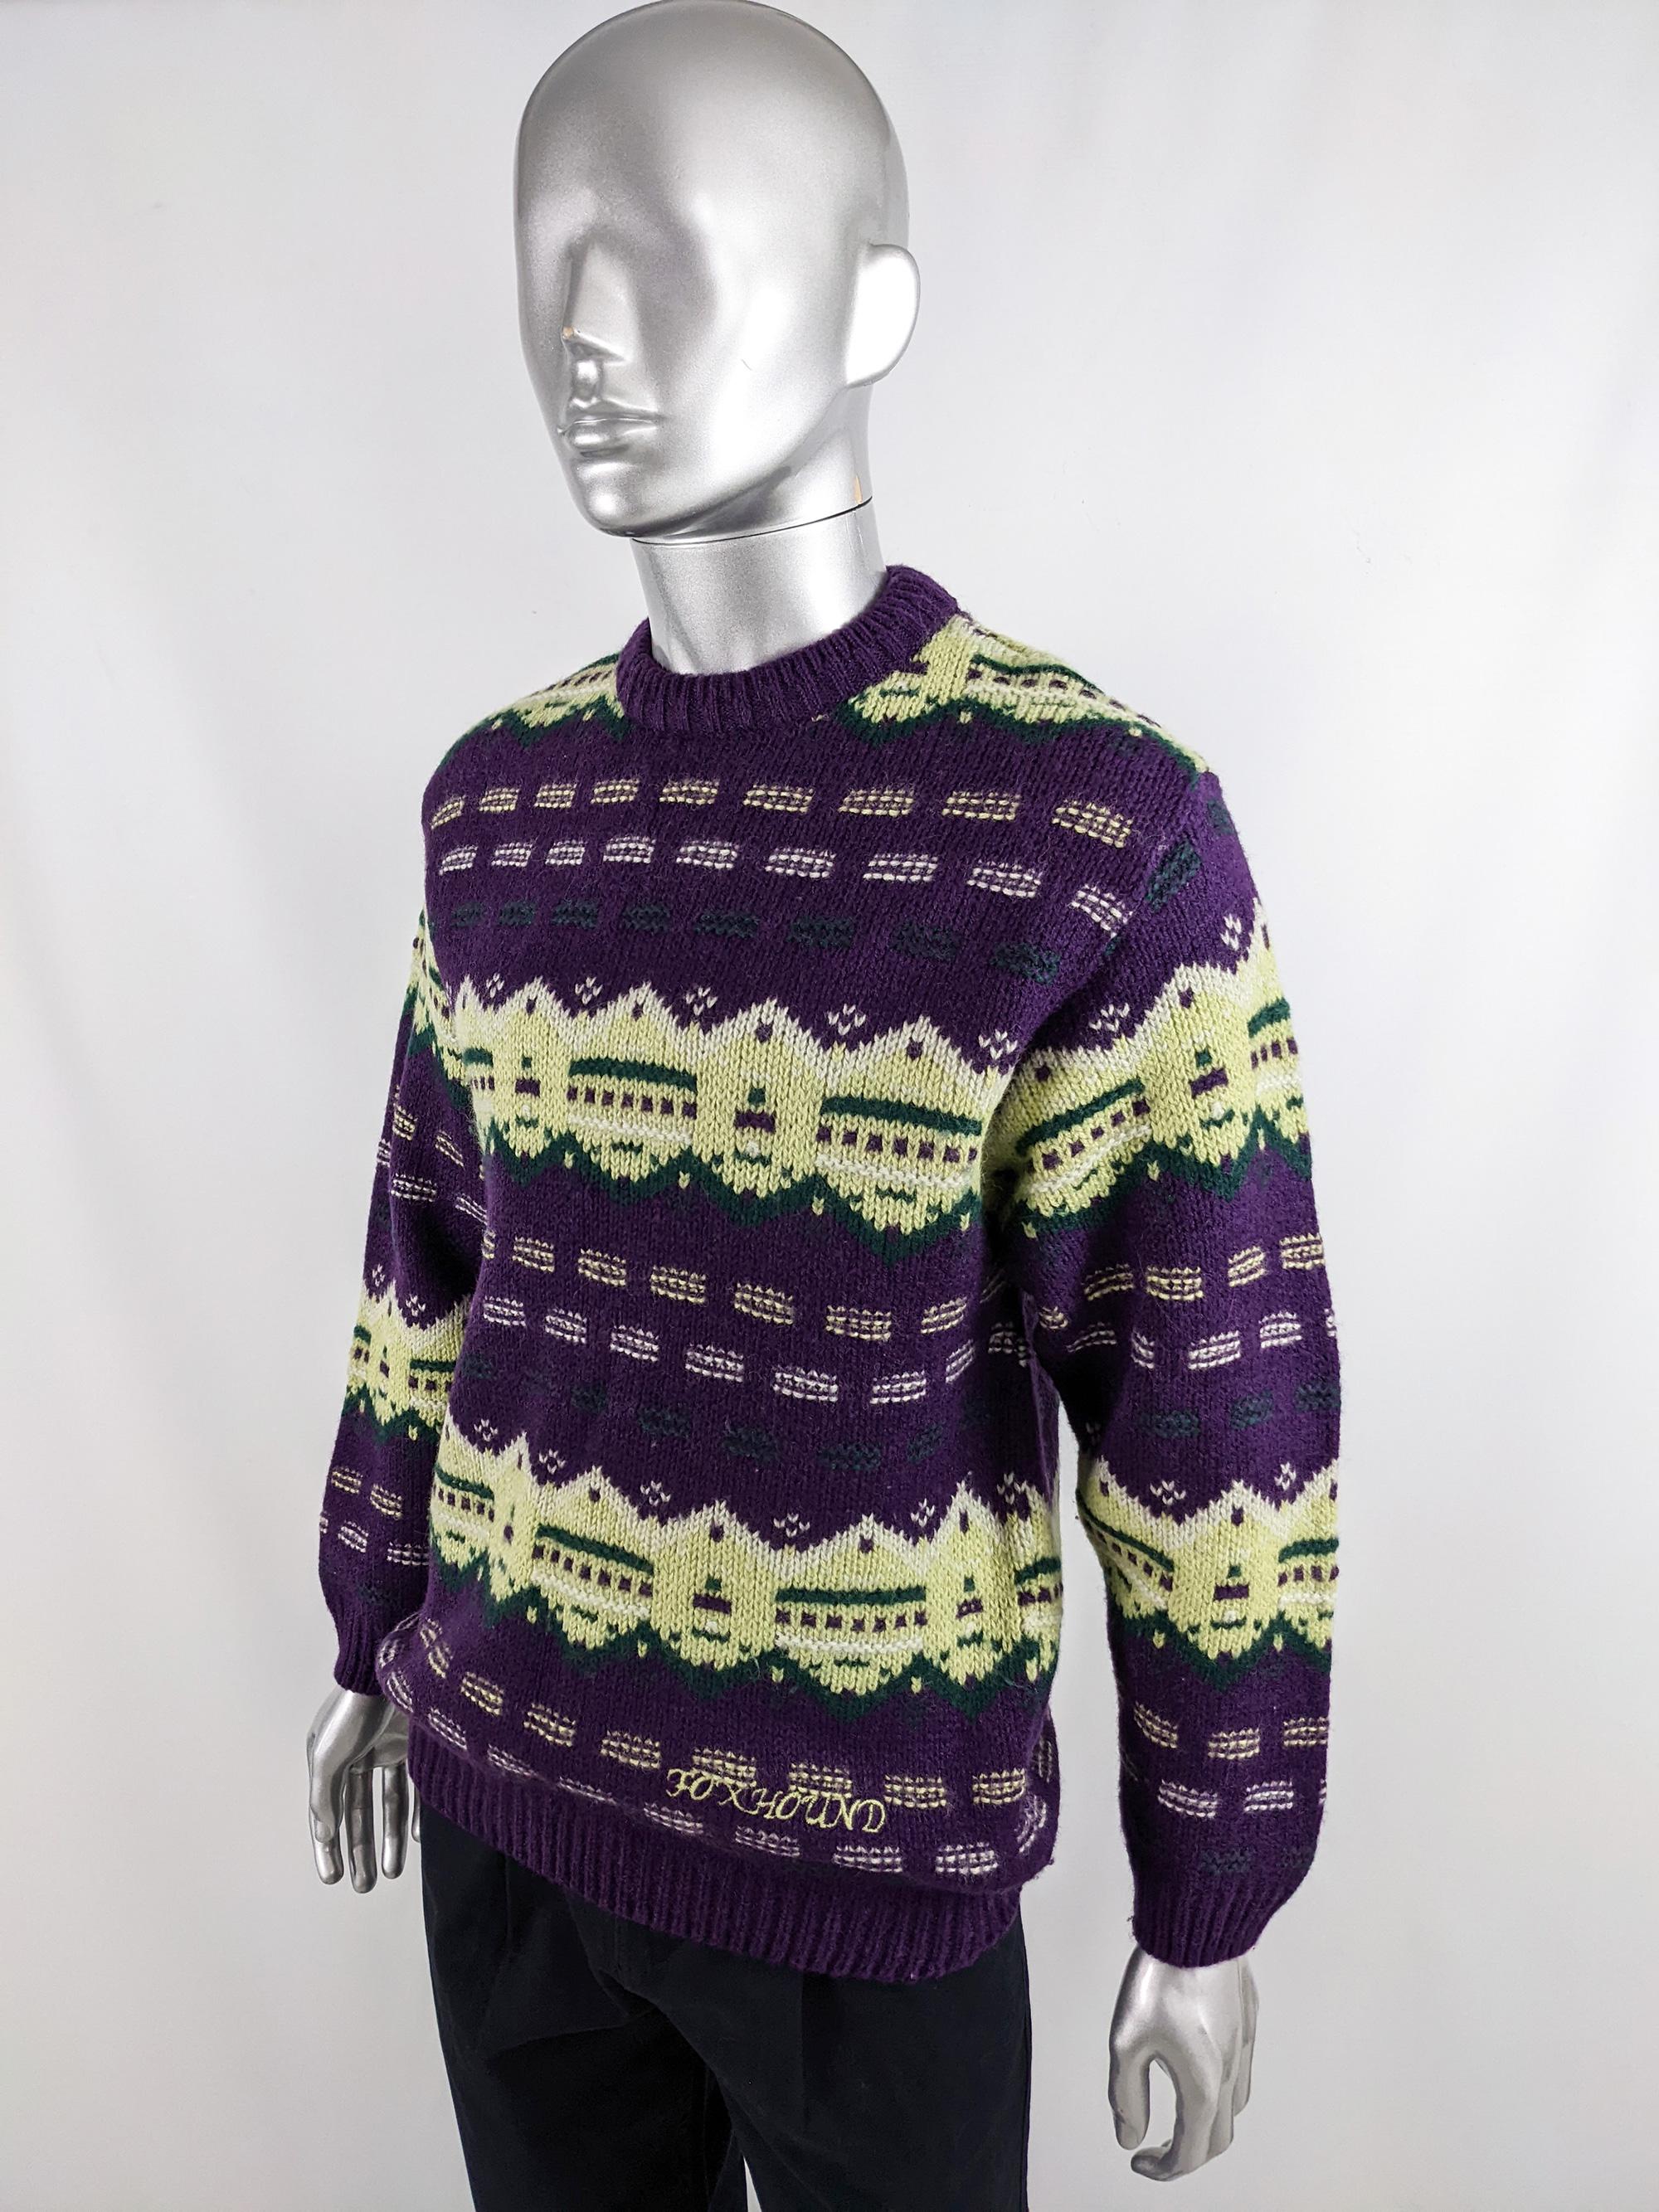 Foxhound Vintage Mens 1980s Italian Purple Knit Sweater In Excellent Condition For Sale In Doncaster, South Yorkshire